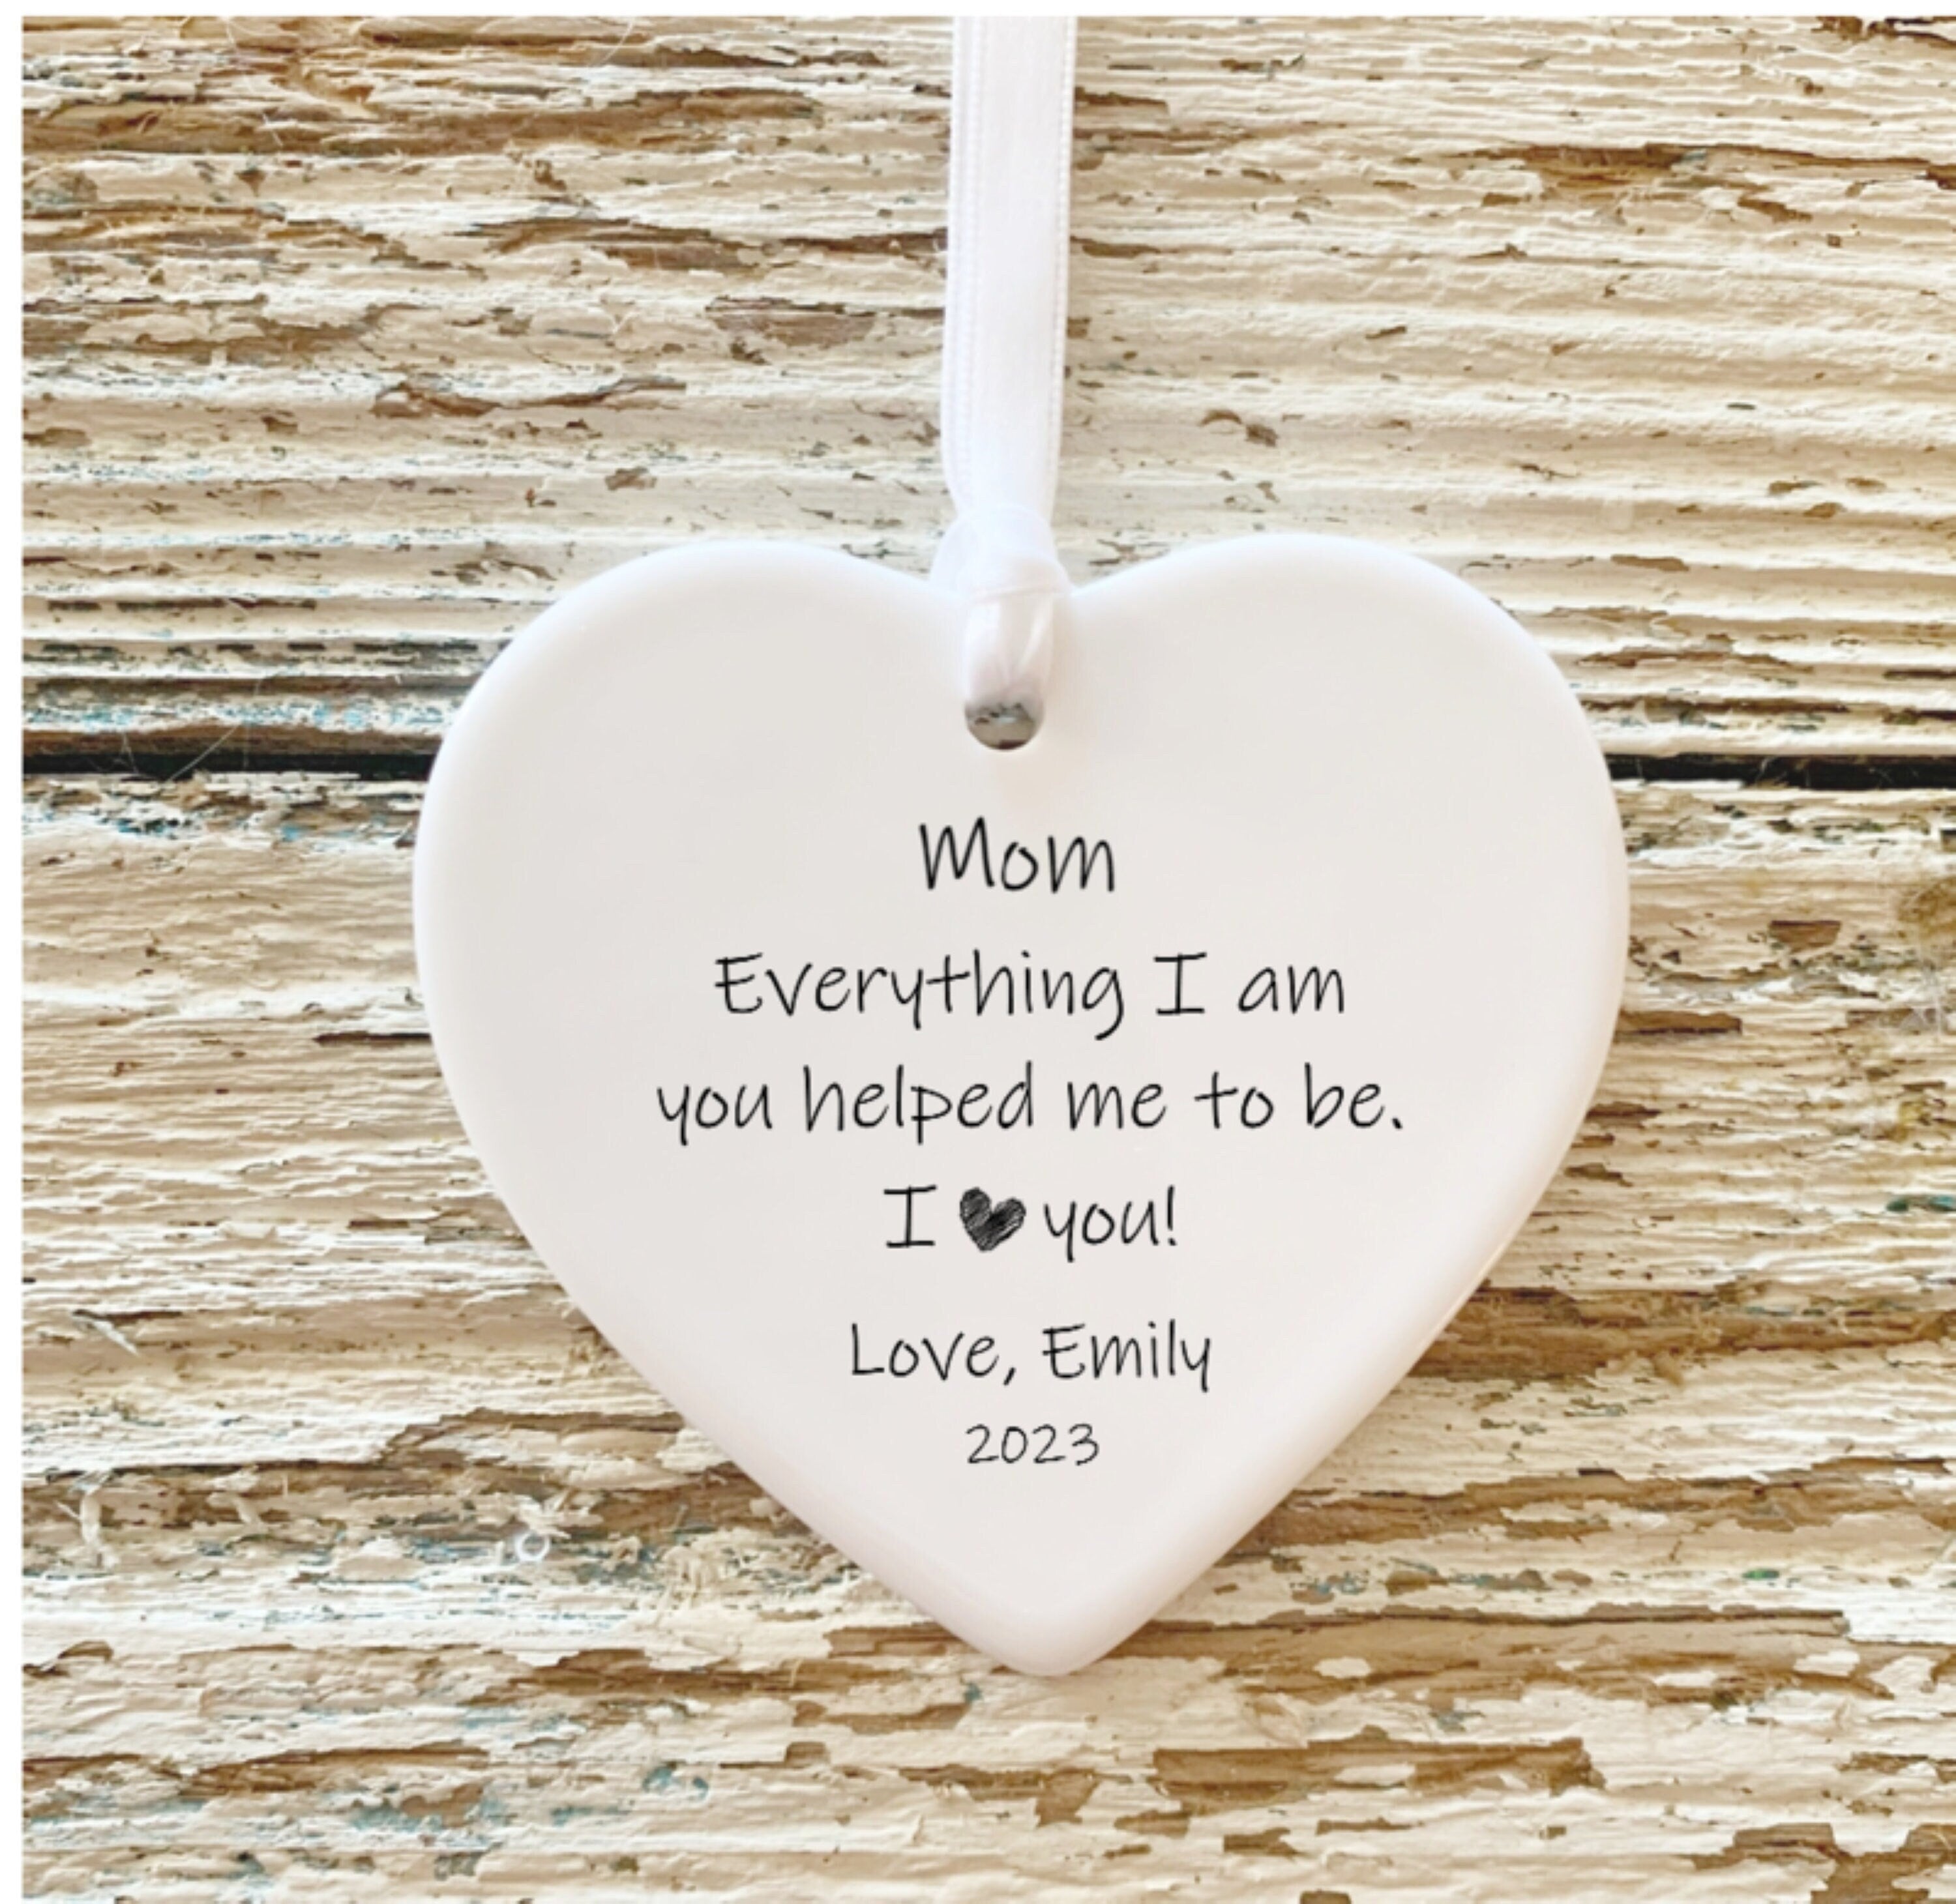 Express Your Love with a Custom Mom Christmas Ornament - Personalized and Heartfelt